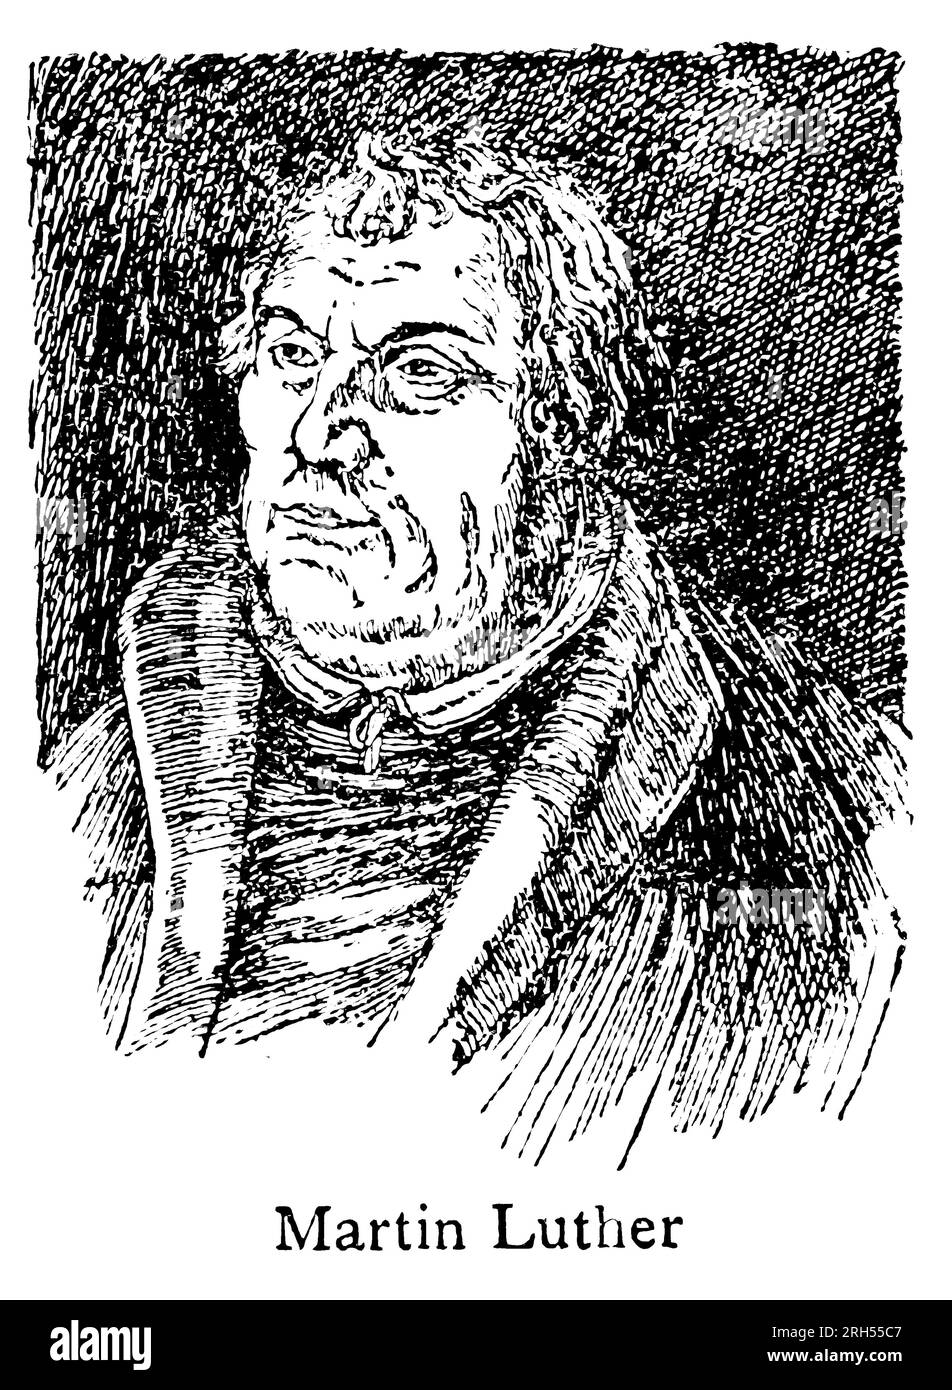 Martin Luther From the book ' Germany ' John Finnemore (1863–1915) was a British school teacher and writer of fictional novels and history and geography texts of countries - most are for younger readers. Finnemore contributed stories to popular boys' magazines of his time such as The Boy's Own Paper and Boys' Realm but he is best remembered for his books about Teddy Lester and his friends at Slapton, a fictitious English public school. The stories have a strong sporting focus, with Lester excelling at rugby, cricket and other games. He also wrote a few adult novels. Finnemore was also a writer Stock Photo